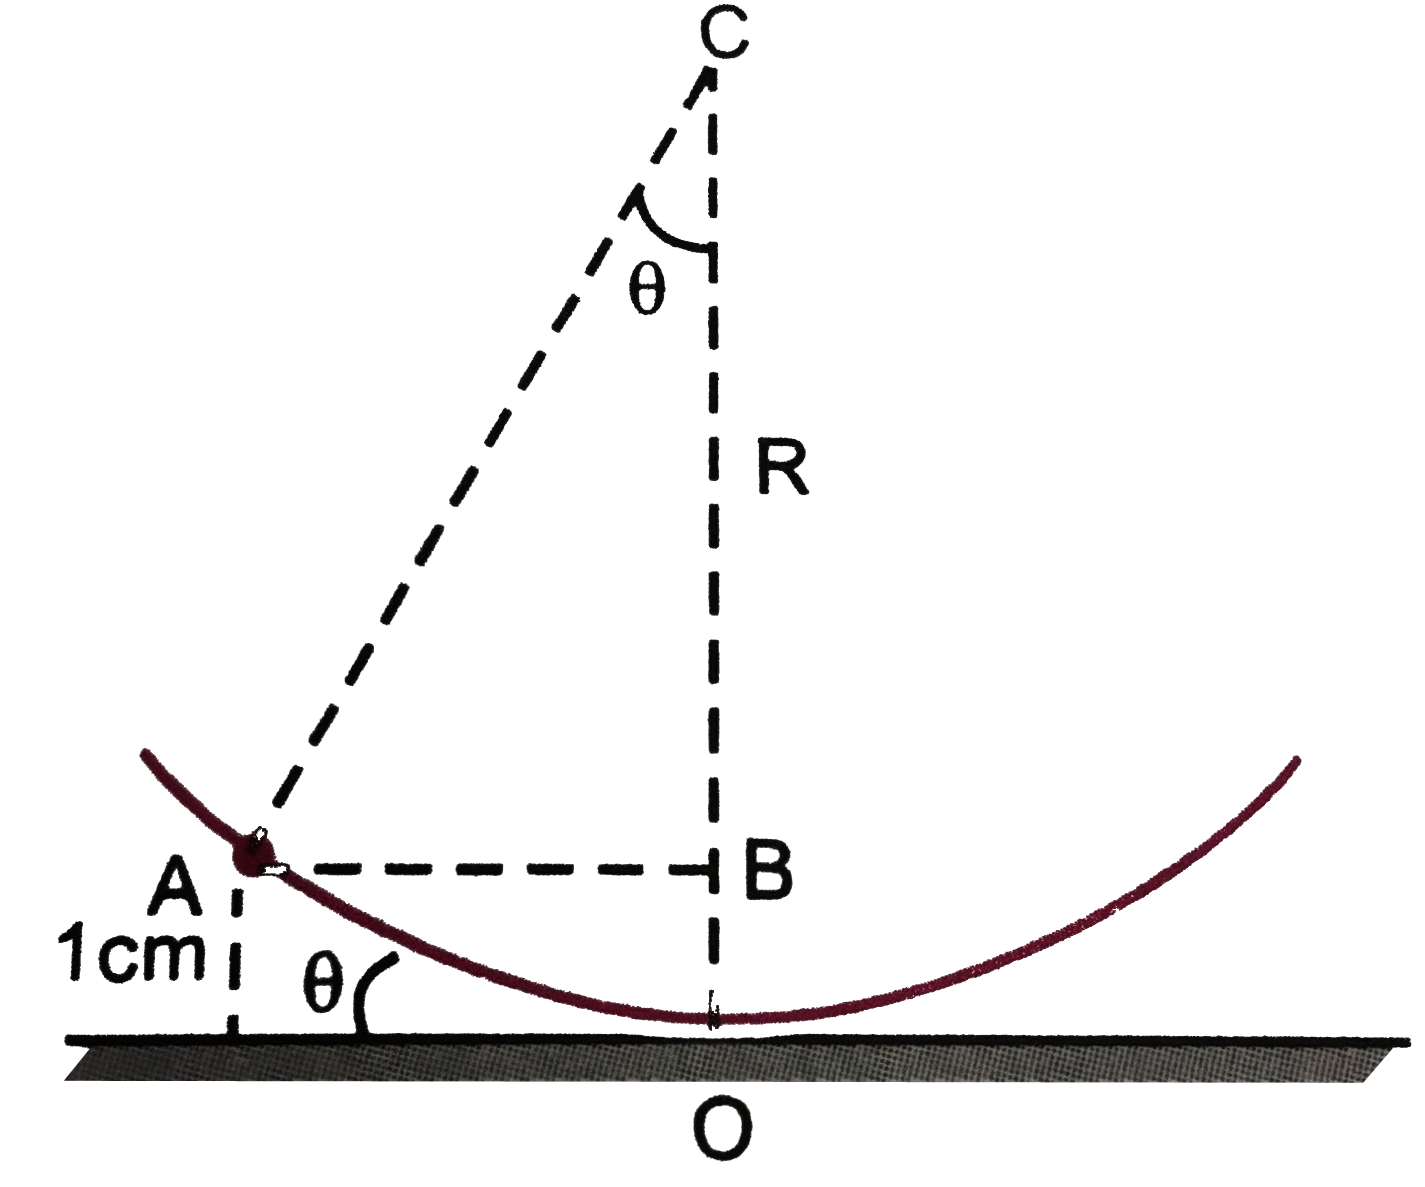 A particle of mass 1 g executes an oscillatory motion on the concave surface of a spherical dish of radius 2m placed on a horizontal plane, Figure . If the motion of the particle begins from a point on the disc at a height of 1 cm. from  the horizontal plane and coefficient of friction  is 0.01 , find the total distance covered by the particle before coming to rest.